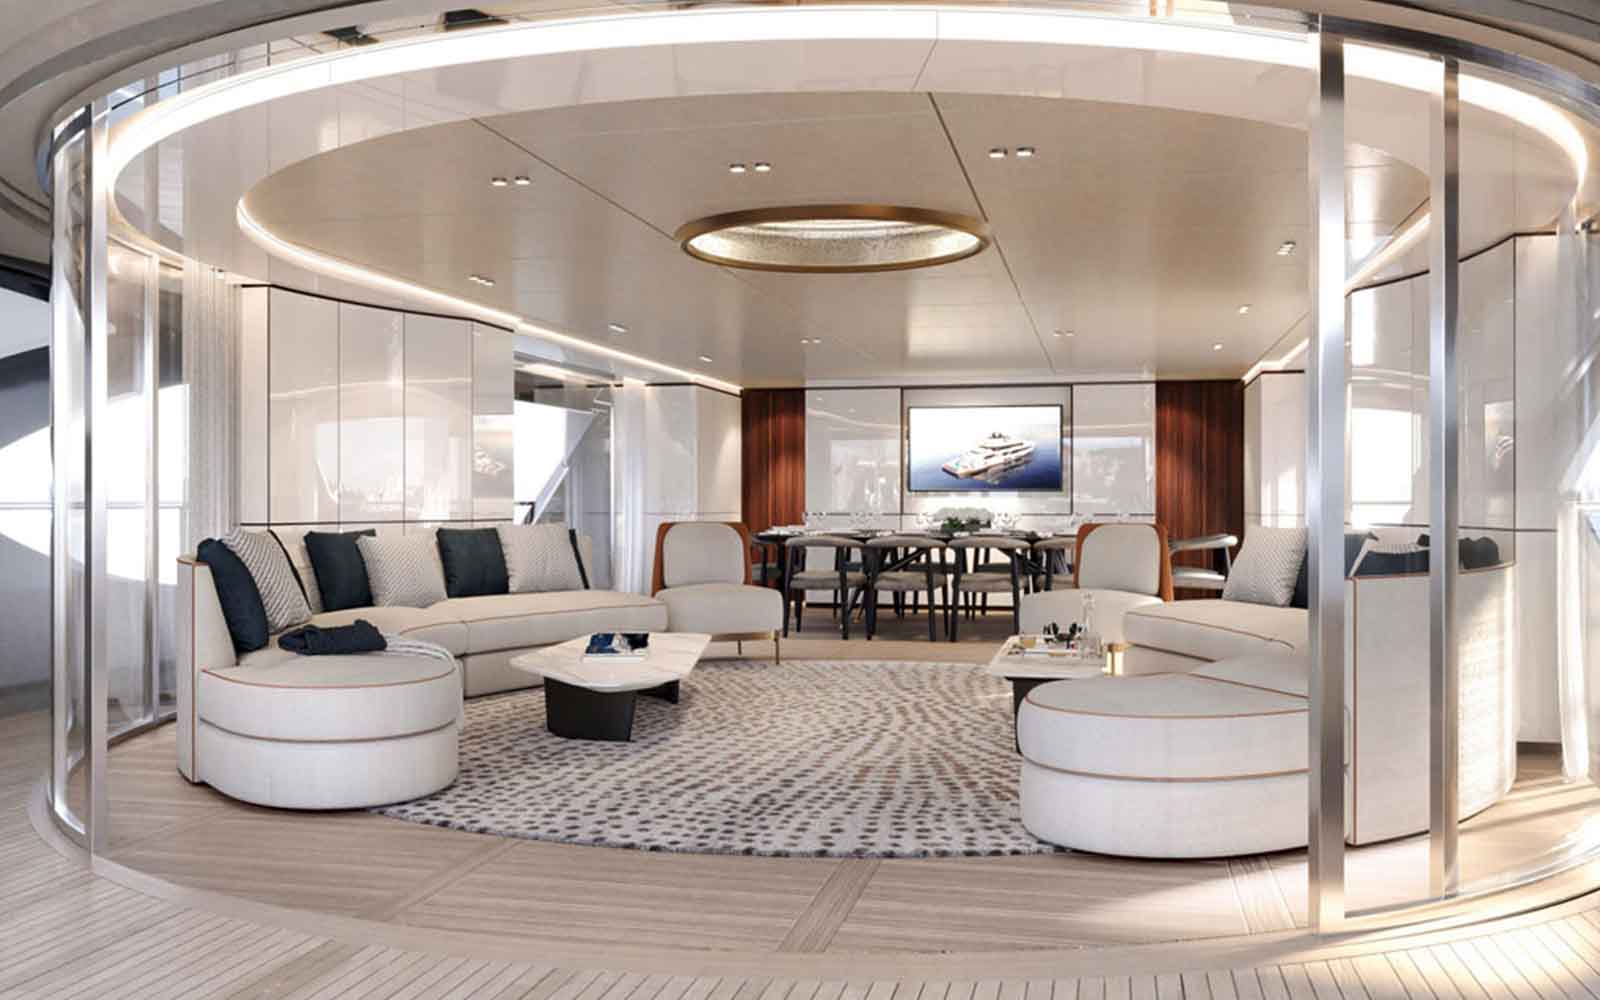 benetti yachts oasis superiate - boat shopping